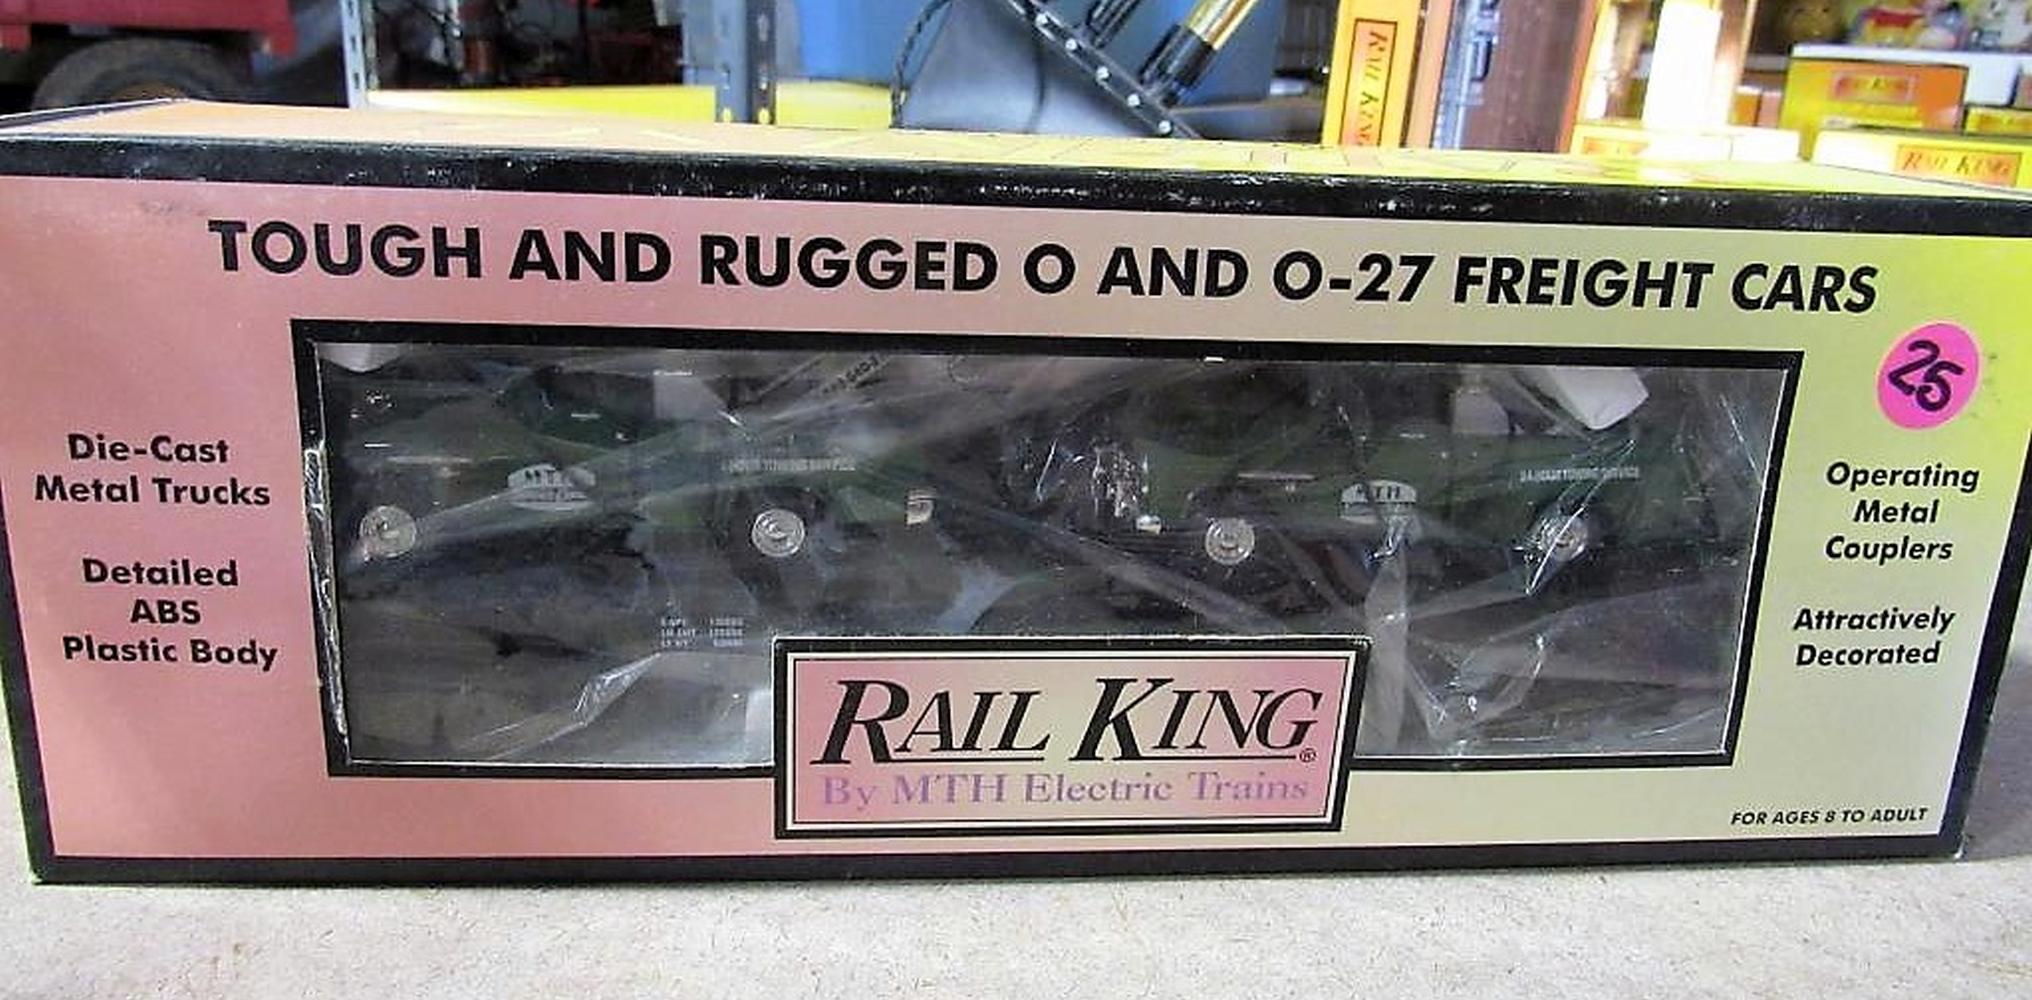 Rail King Tough and Rugged O and O-27 Freight Cars